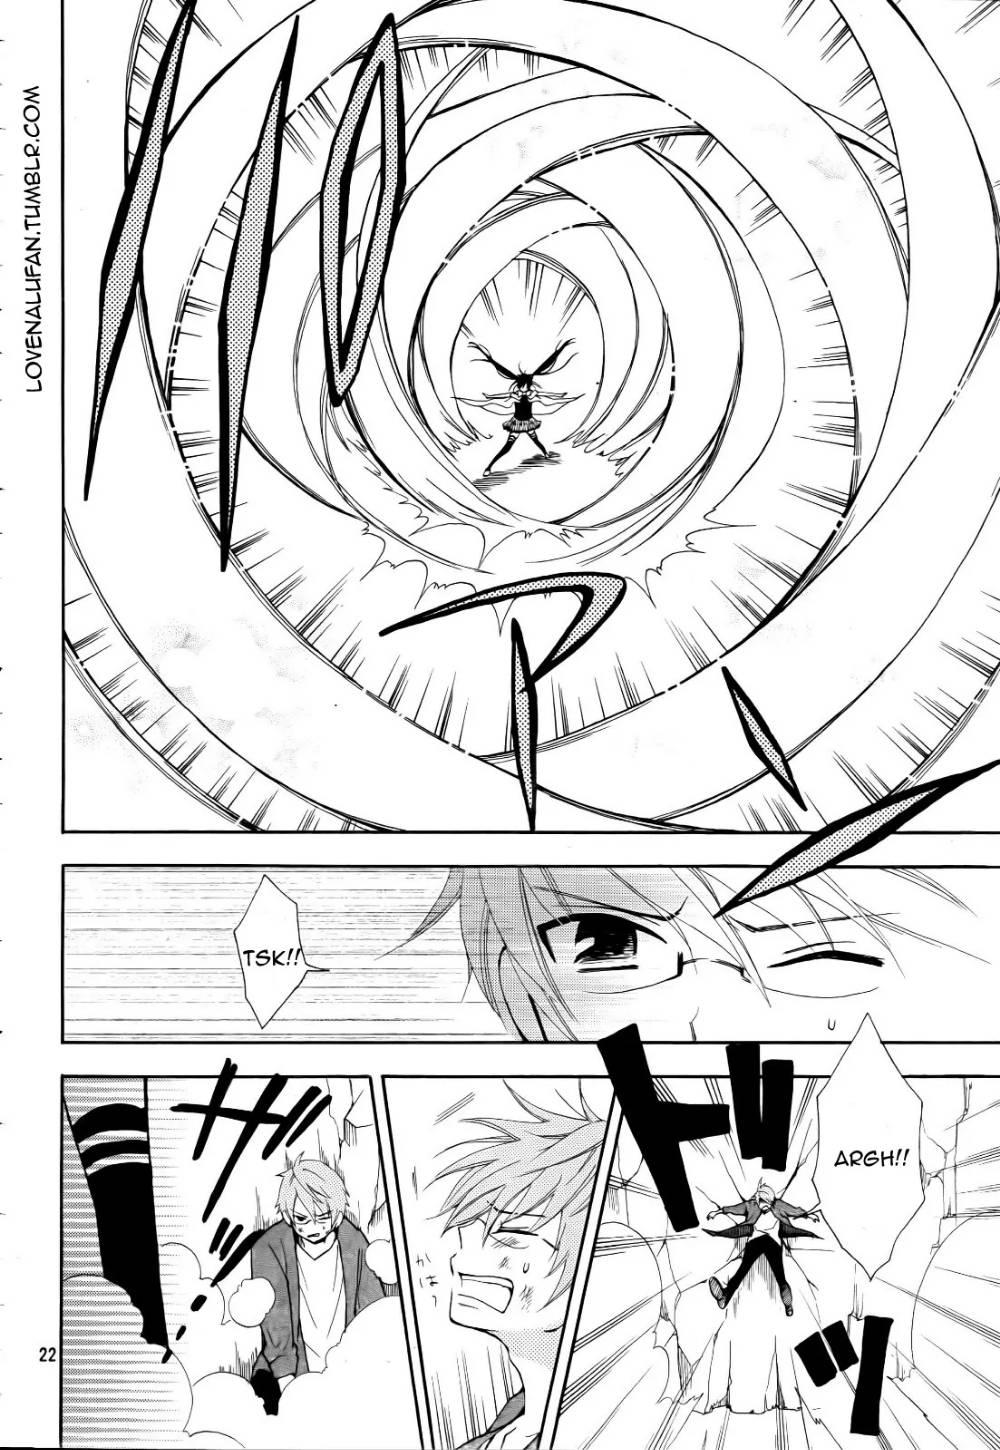 Fairy Tail - Blue Mistral - episode 3 - 21